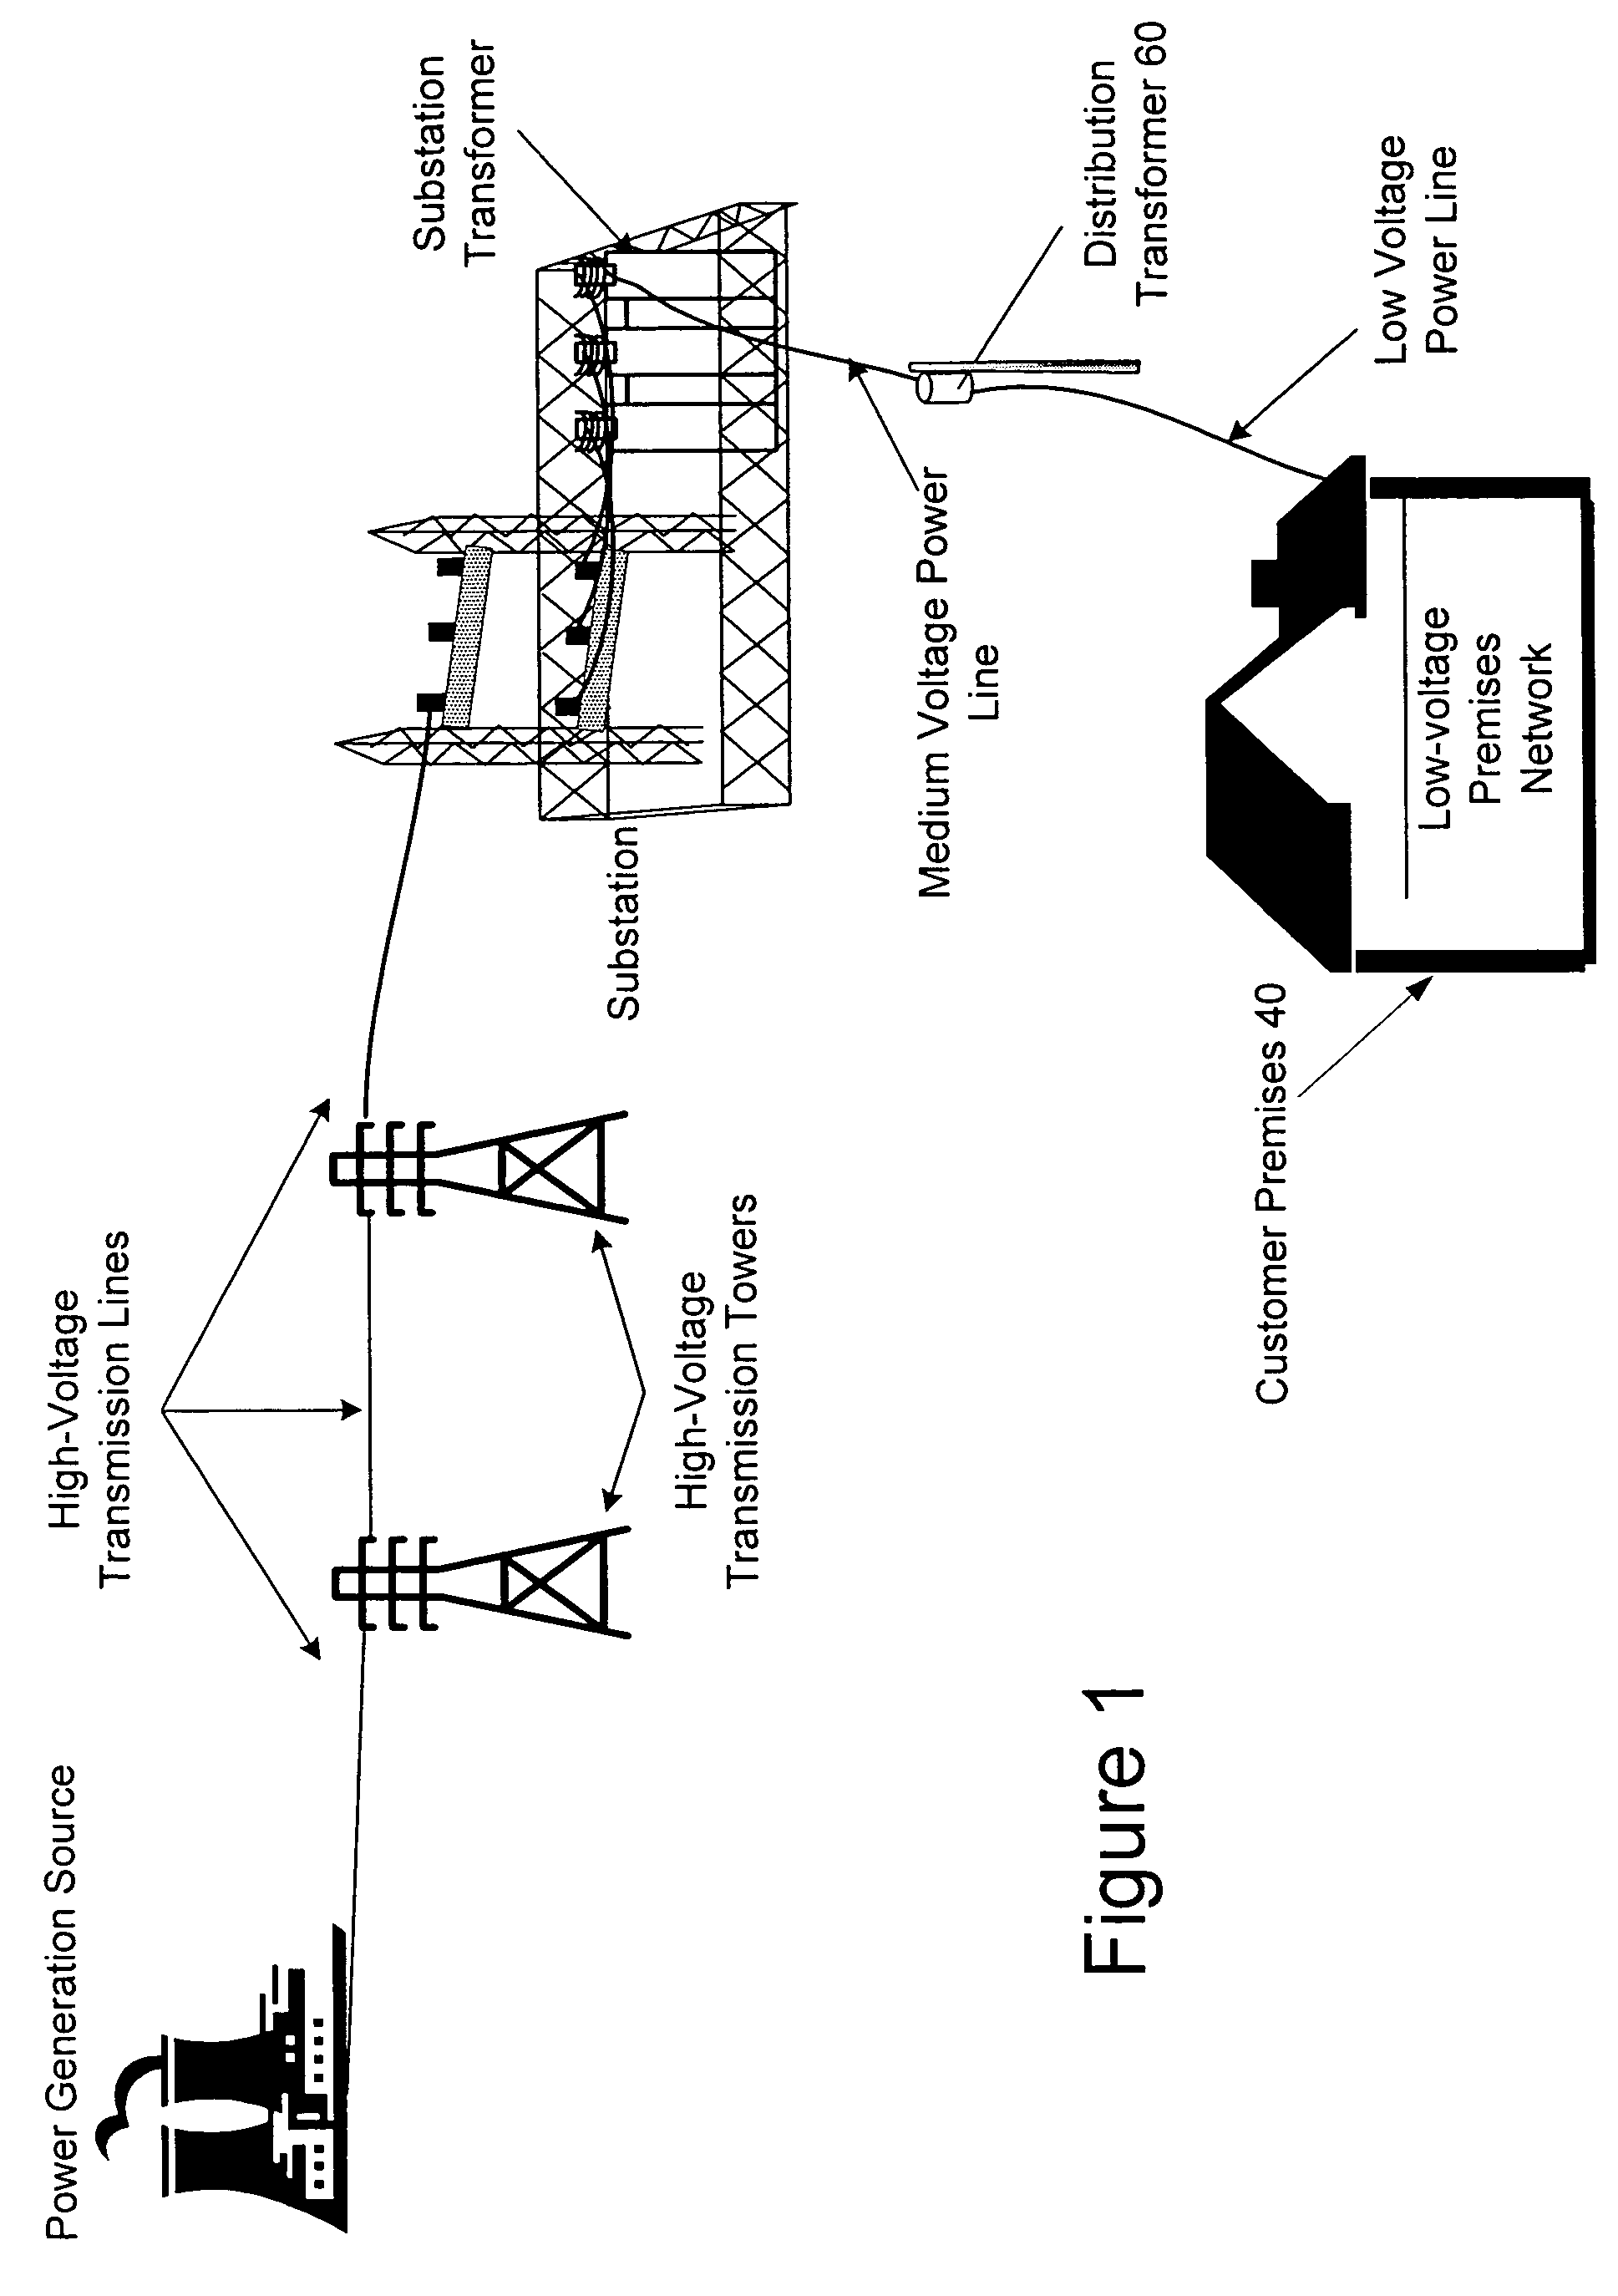 Multi-subnet power line communications system and method